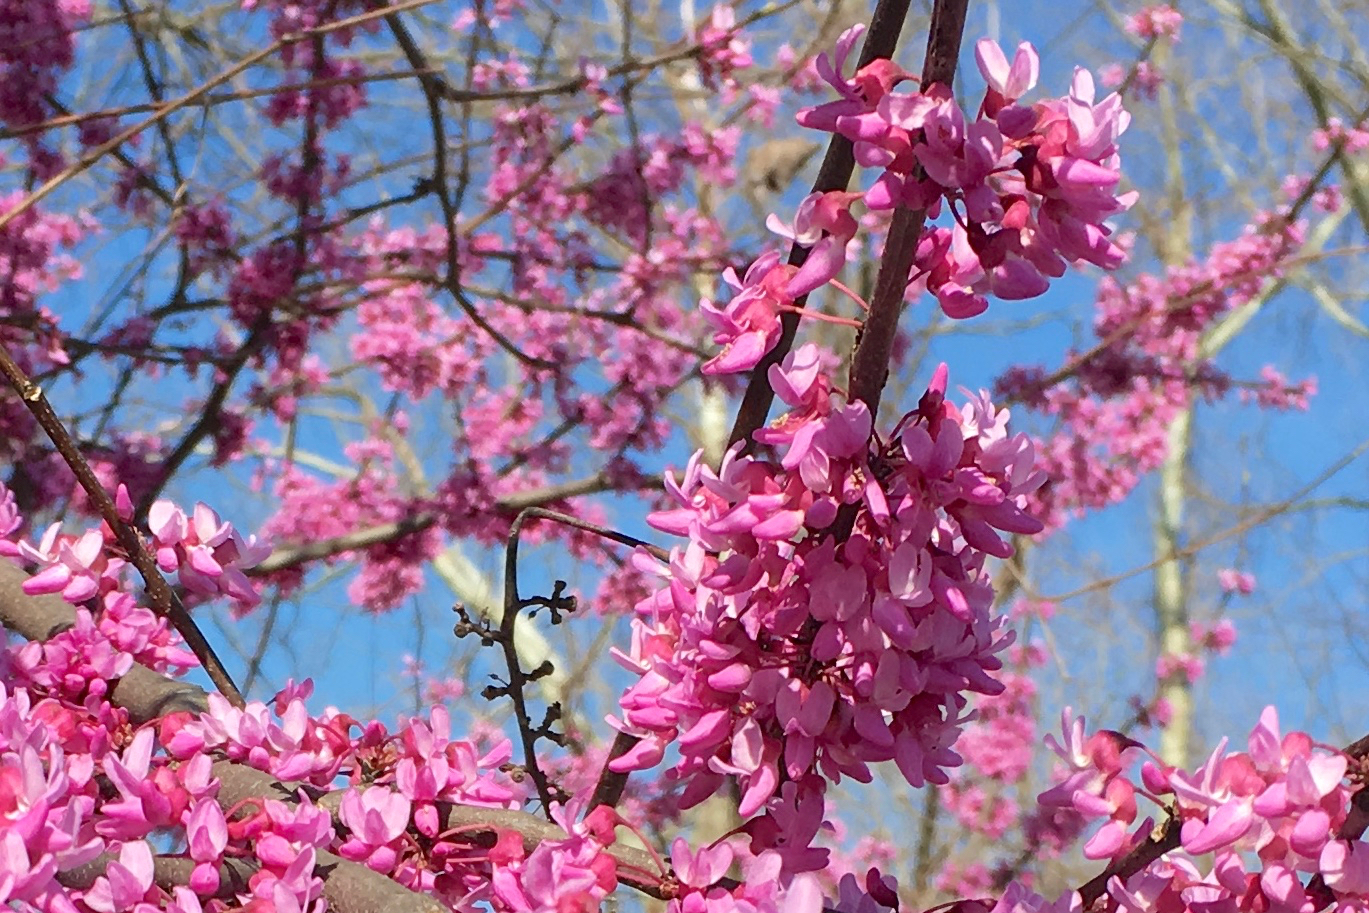 An eastern redbud in full bloom in Prince Edward County, Virginia, representing the great natural beauty of Southside Virginia that conservation easements can help to preserve